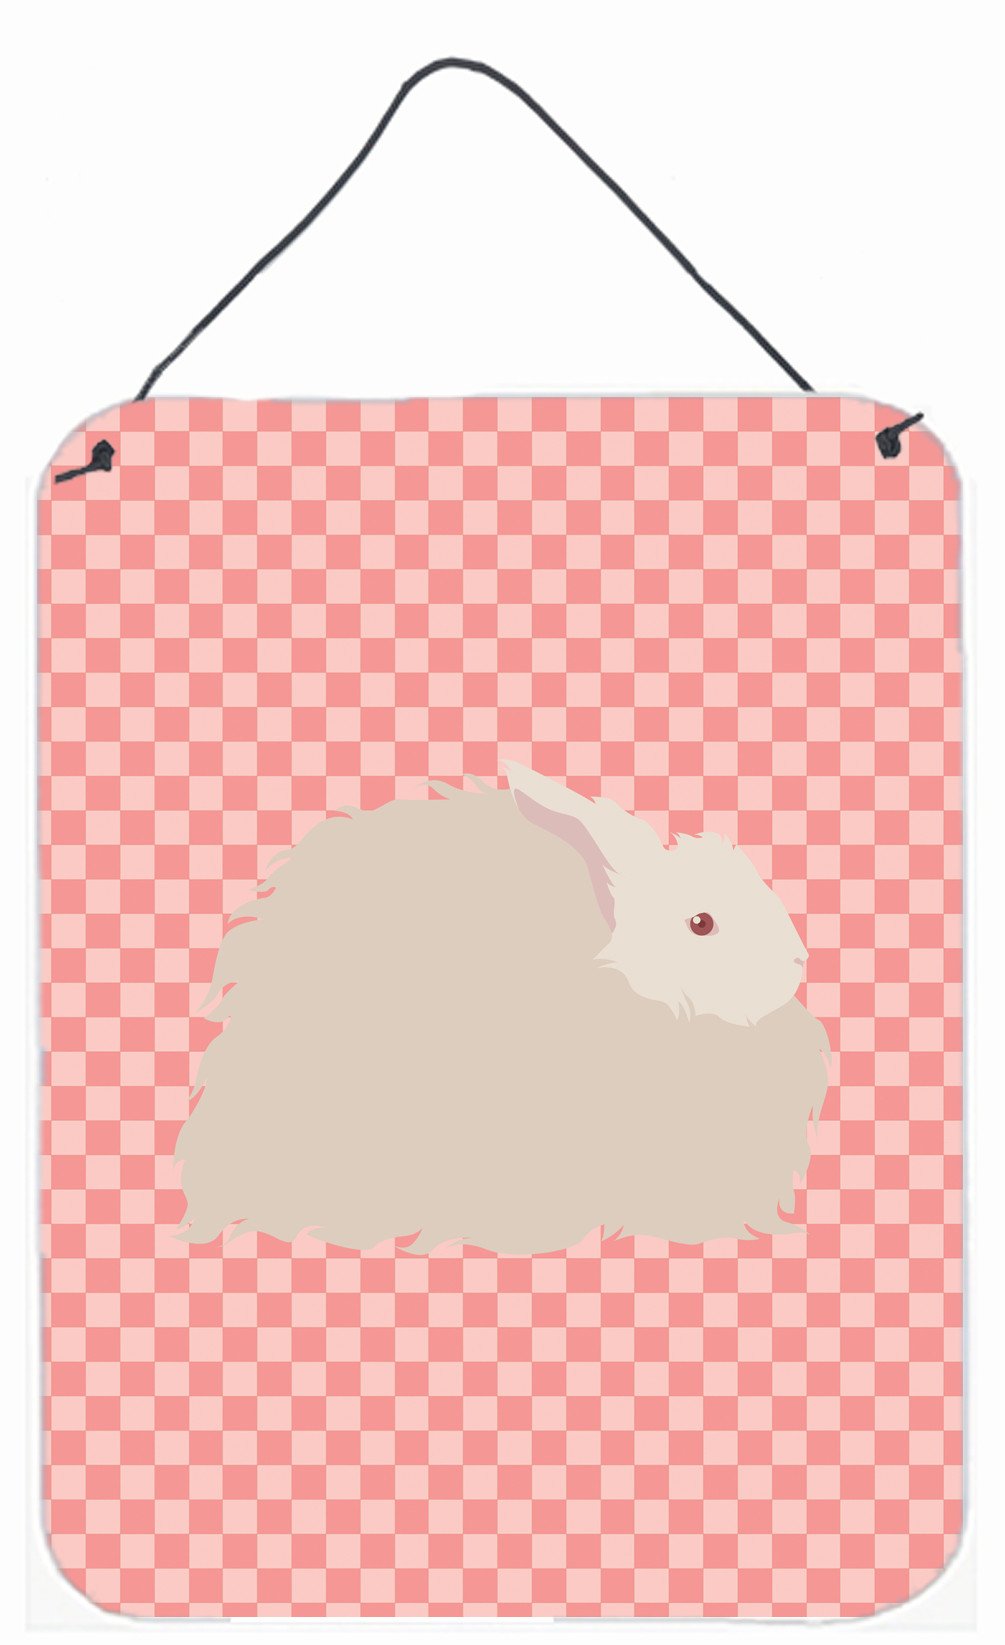 Fluffy Angora Rabbit Pink Check Wall or Door Hanging Prints BB7959DS1216 by Caroline's Treasures